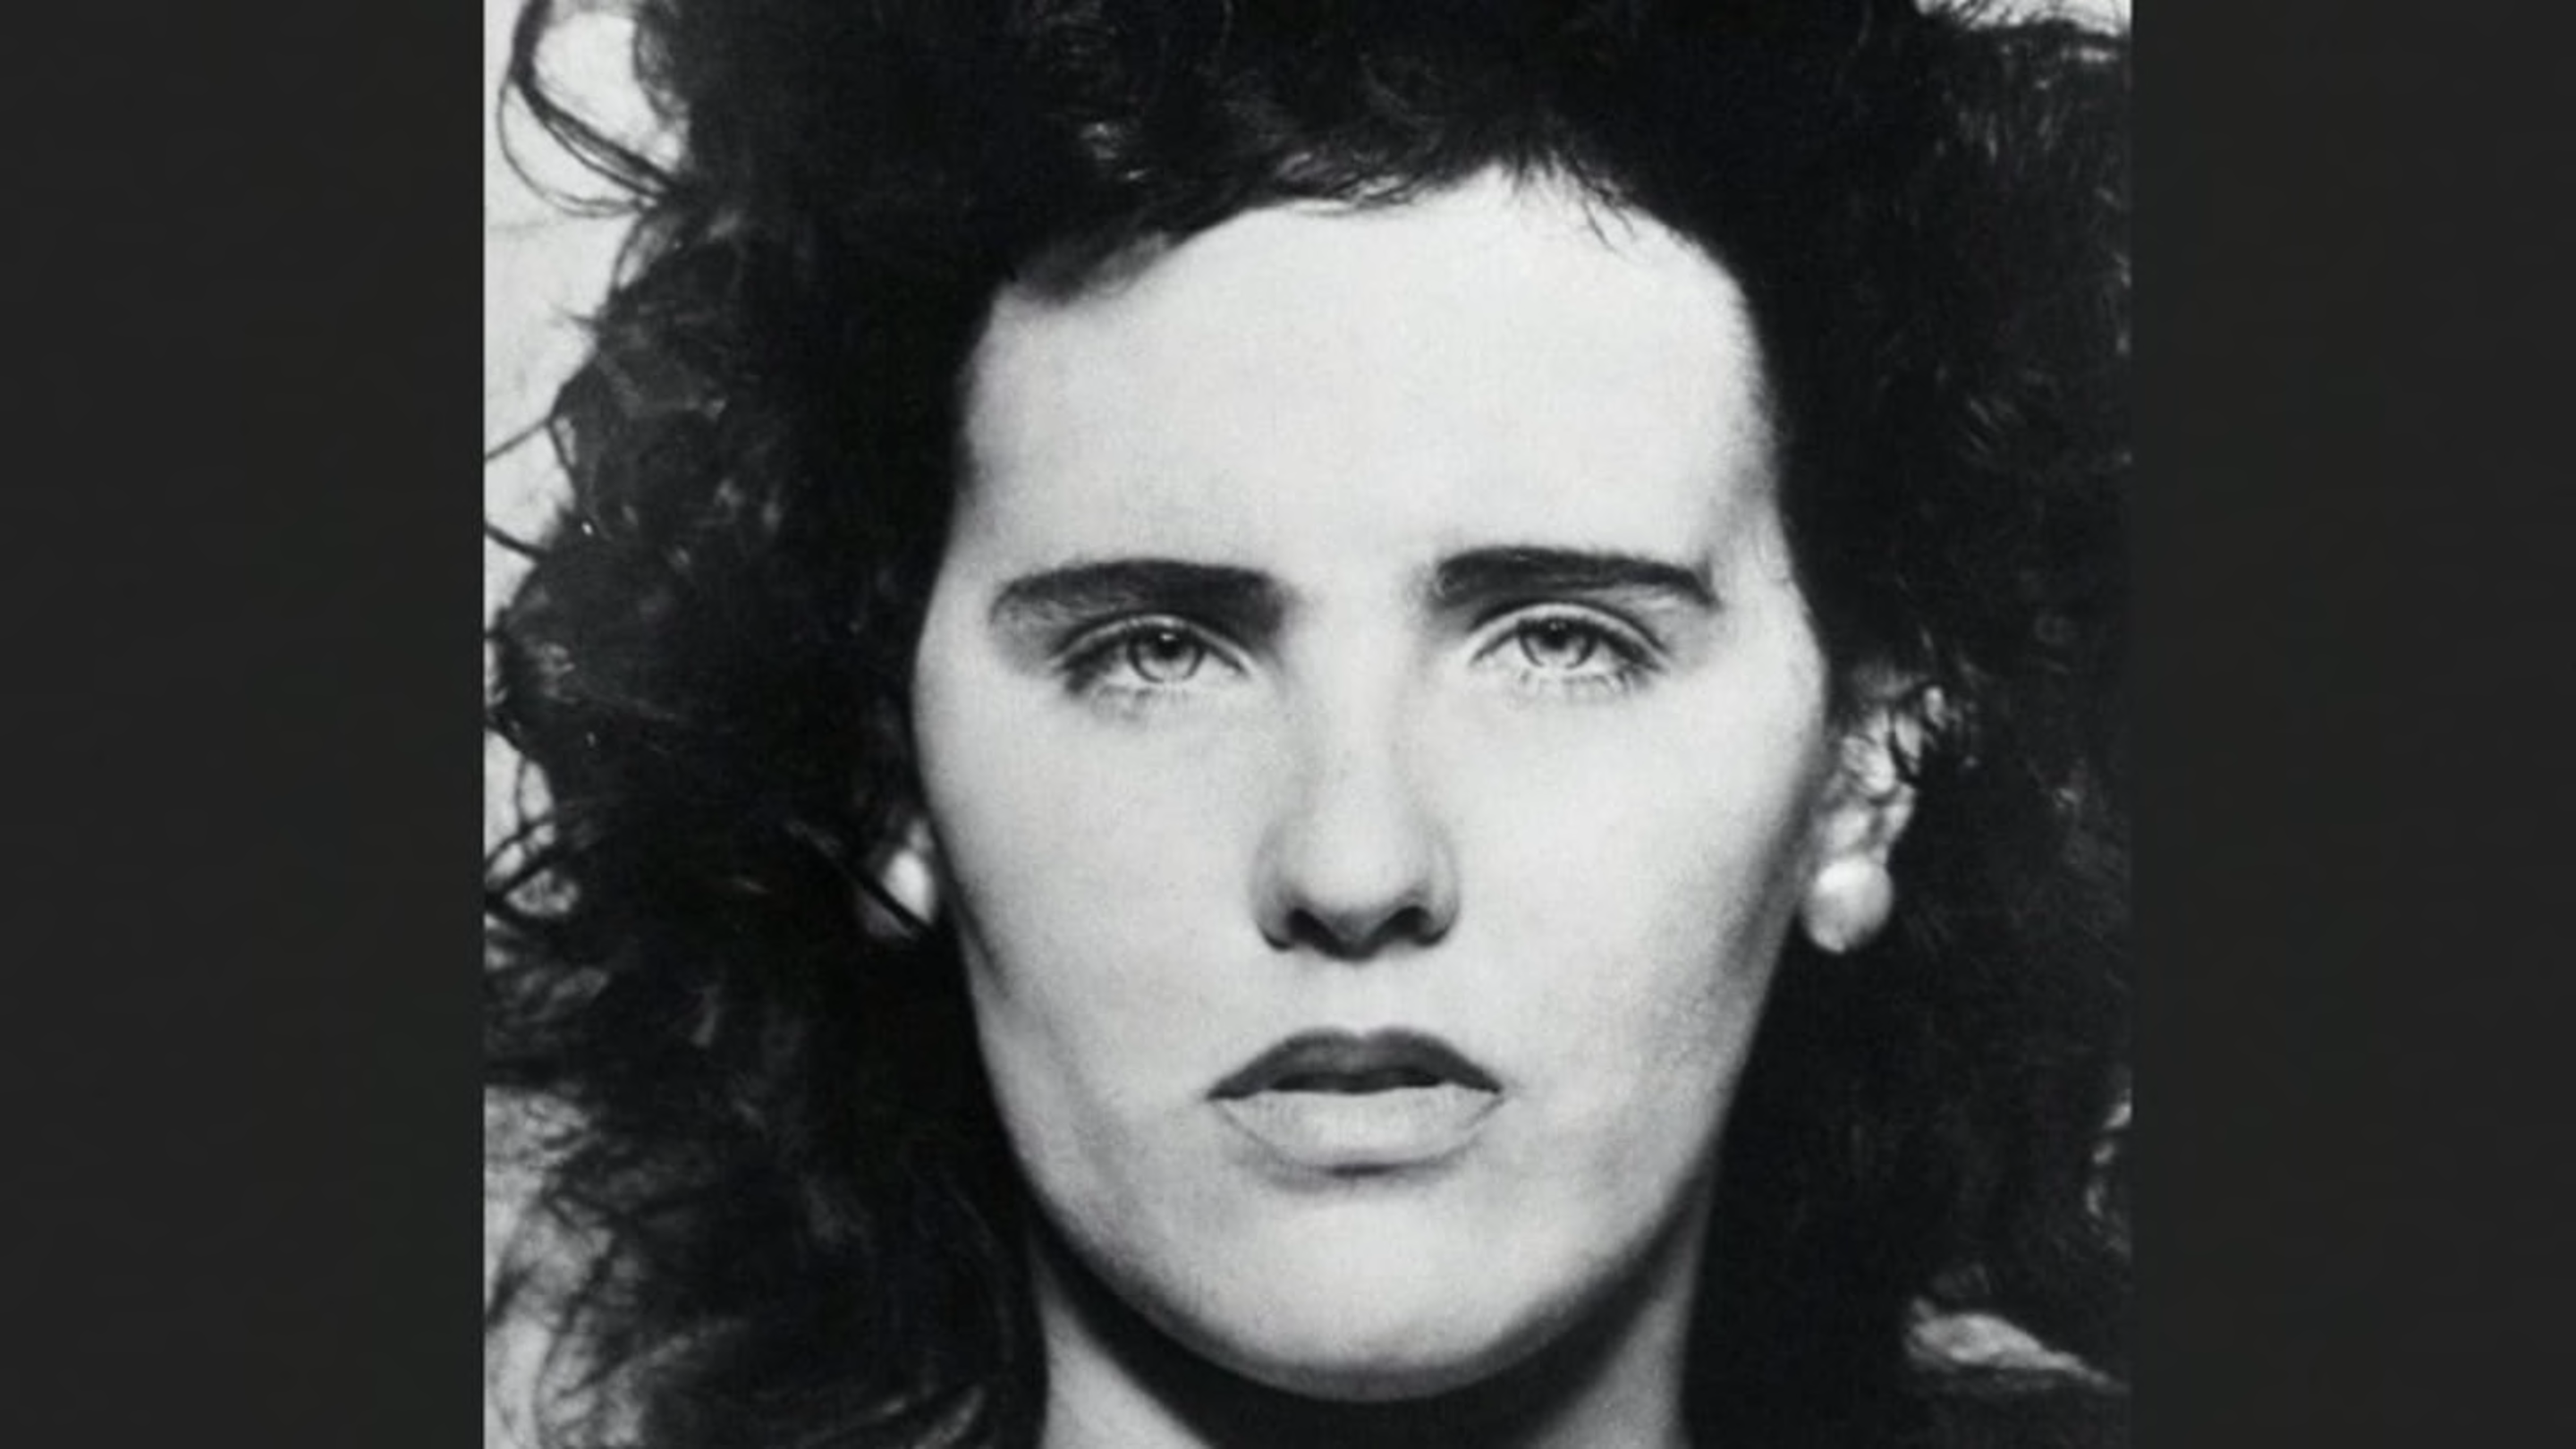 10 Shocking Facts About The Black Dahlia, Hollywood’s Most Famous
Unsolved Murder